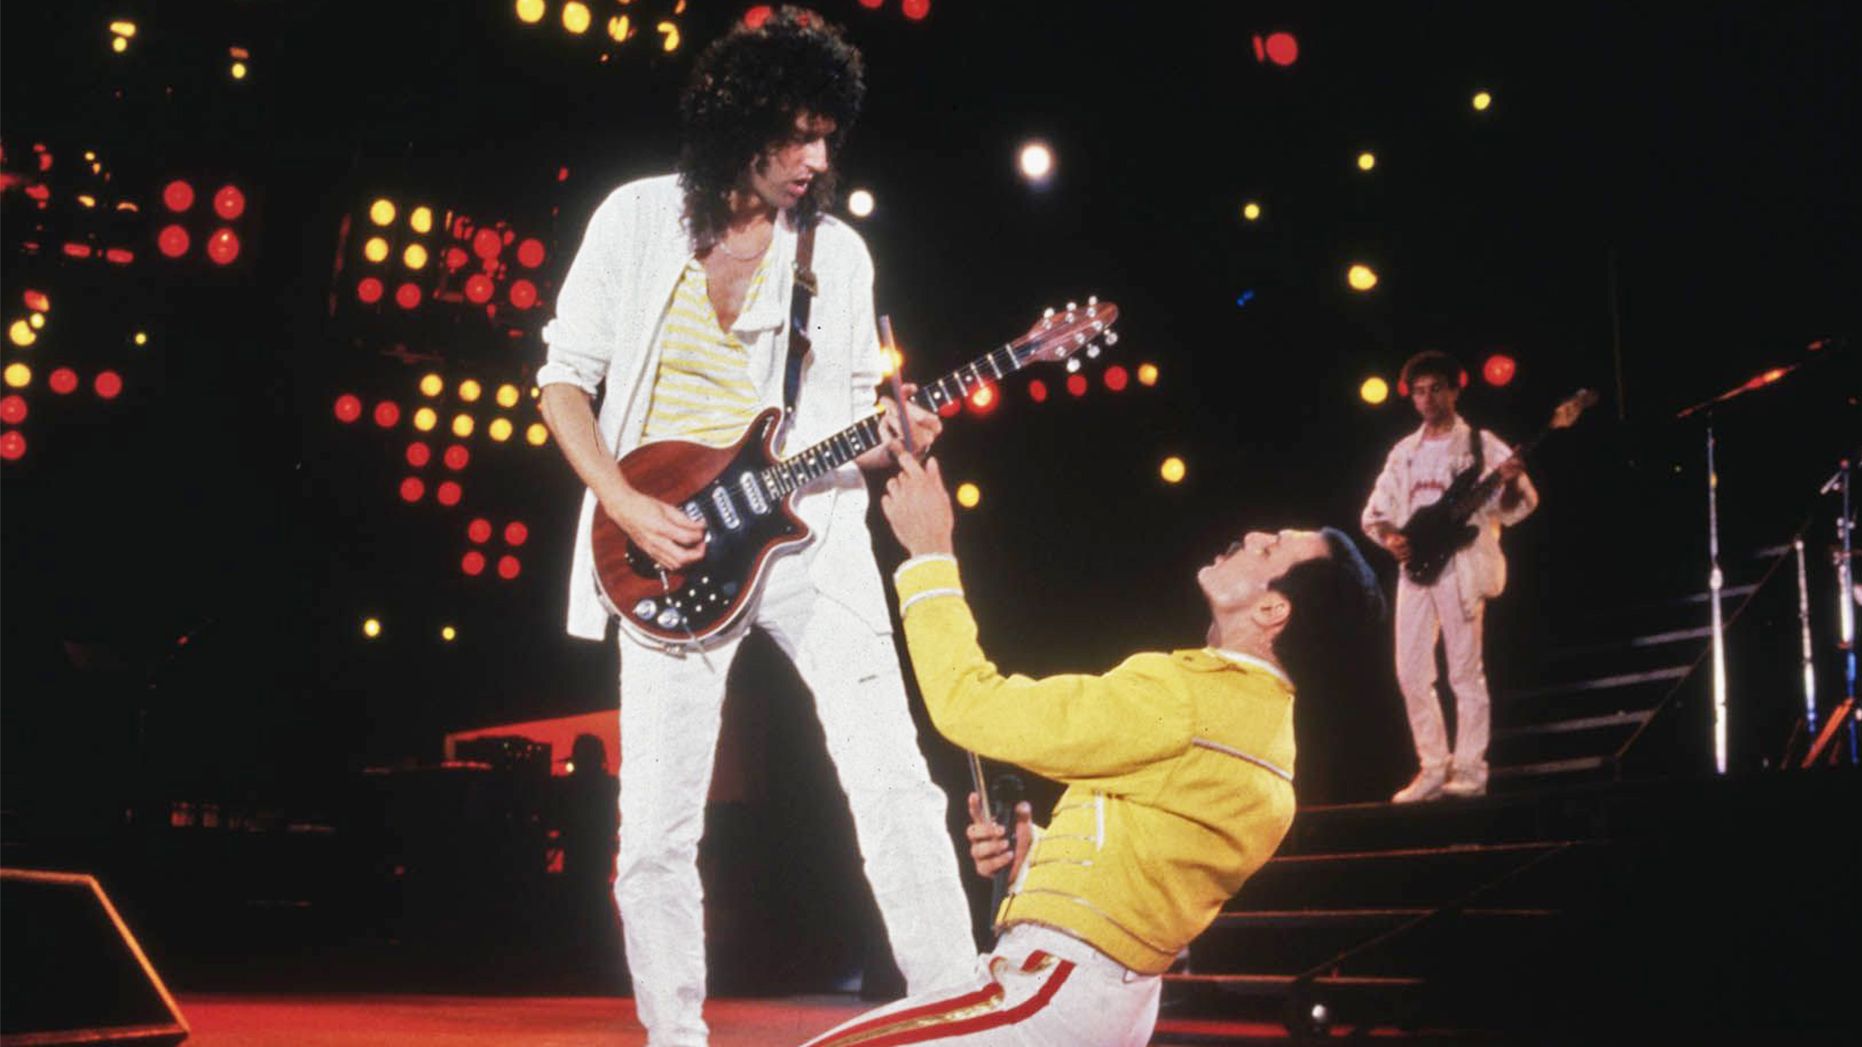 Song of the Day, August 14: You're My Best Friend by Queen